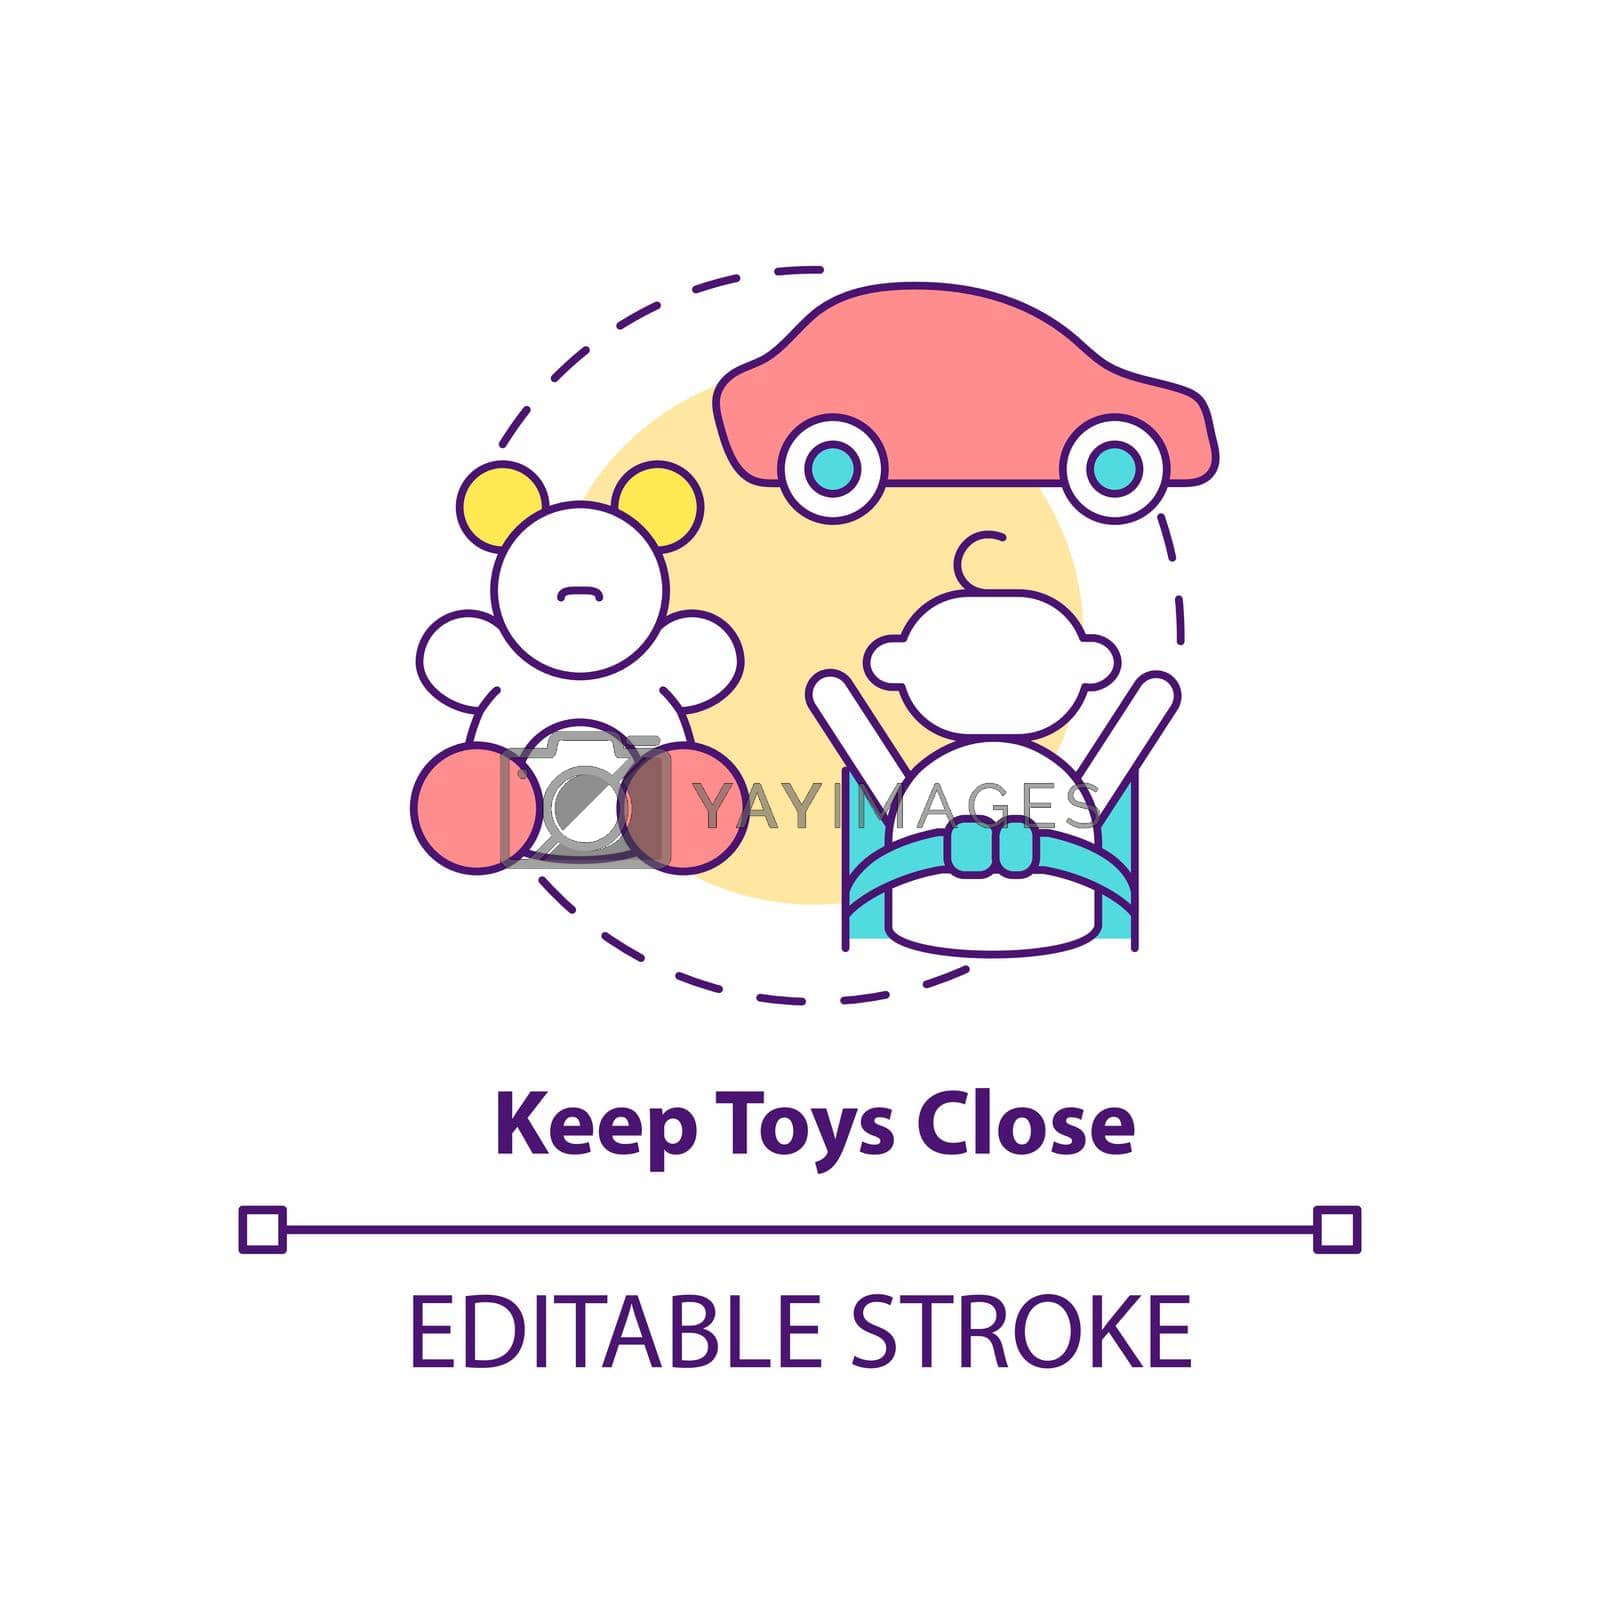 Royalty free image of Keep toys close concept icon by bsd